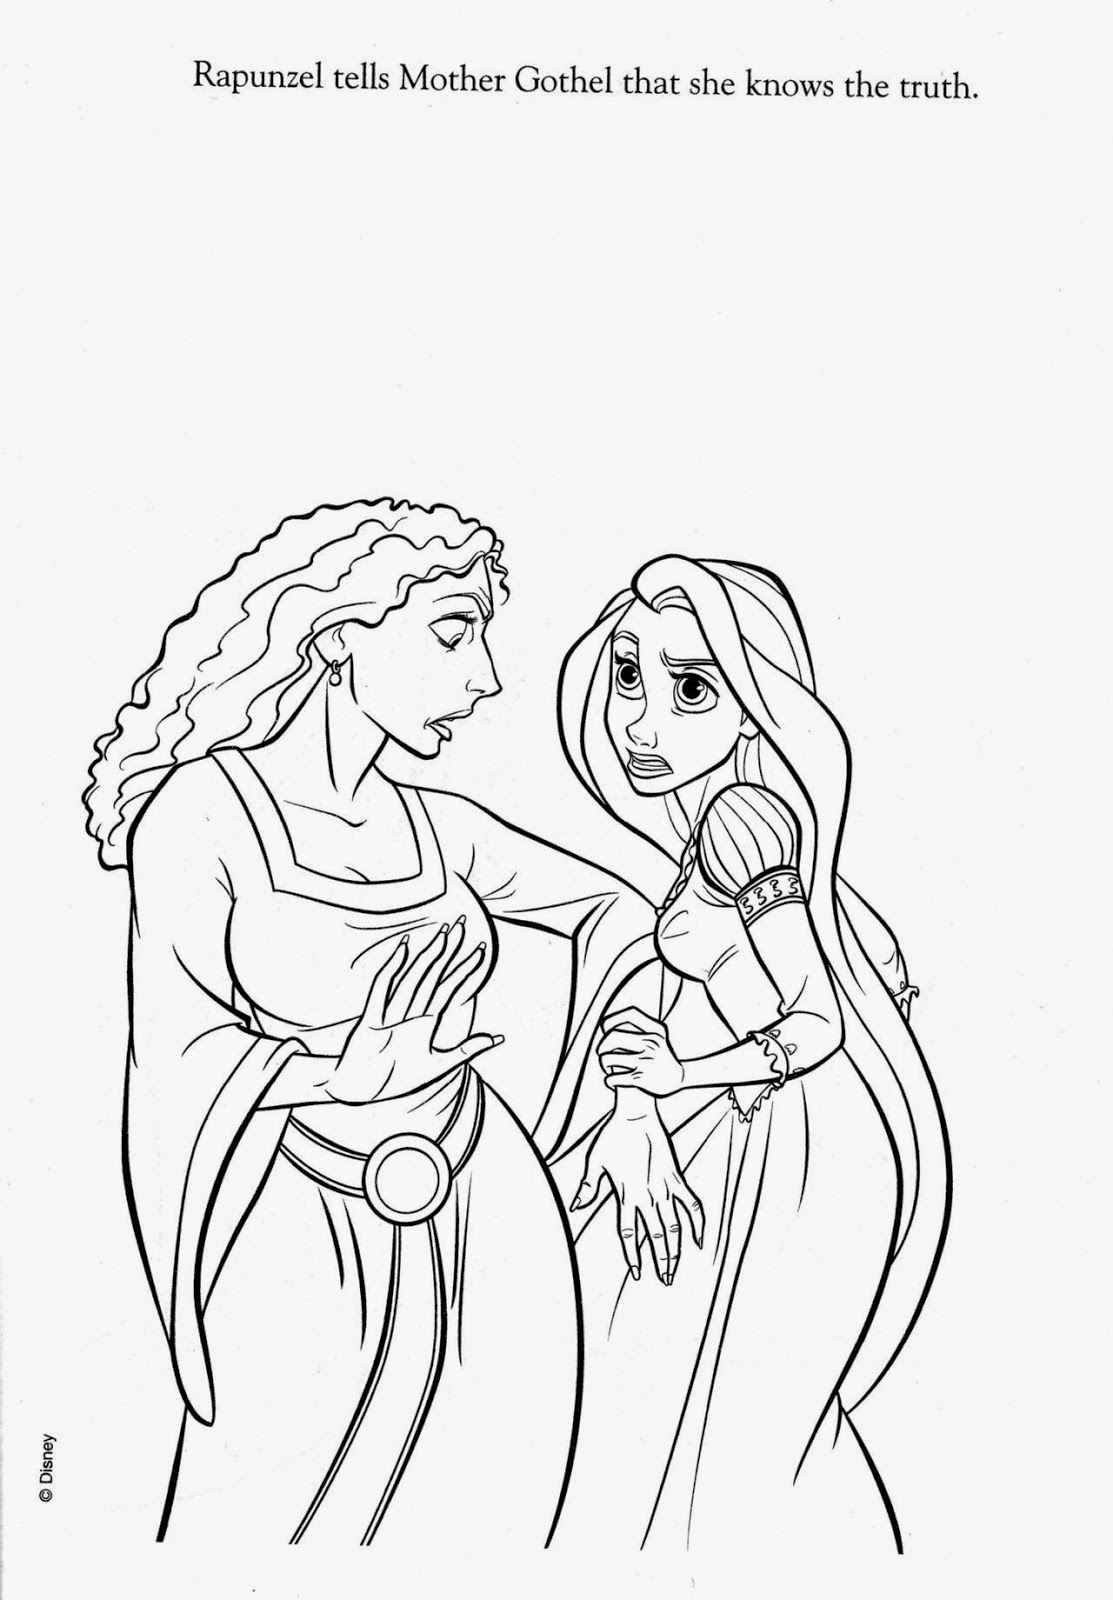 Download Coloring Pages: "Tangled" Free Printable Coloring Pages of ...